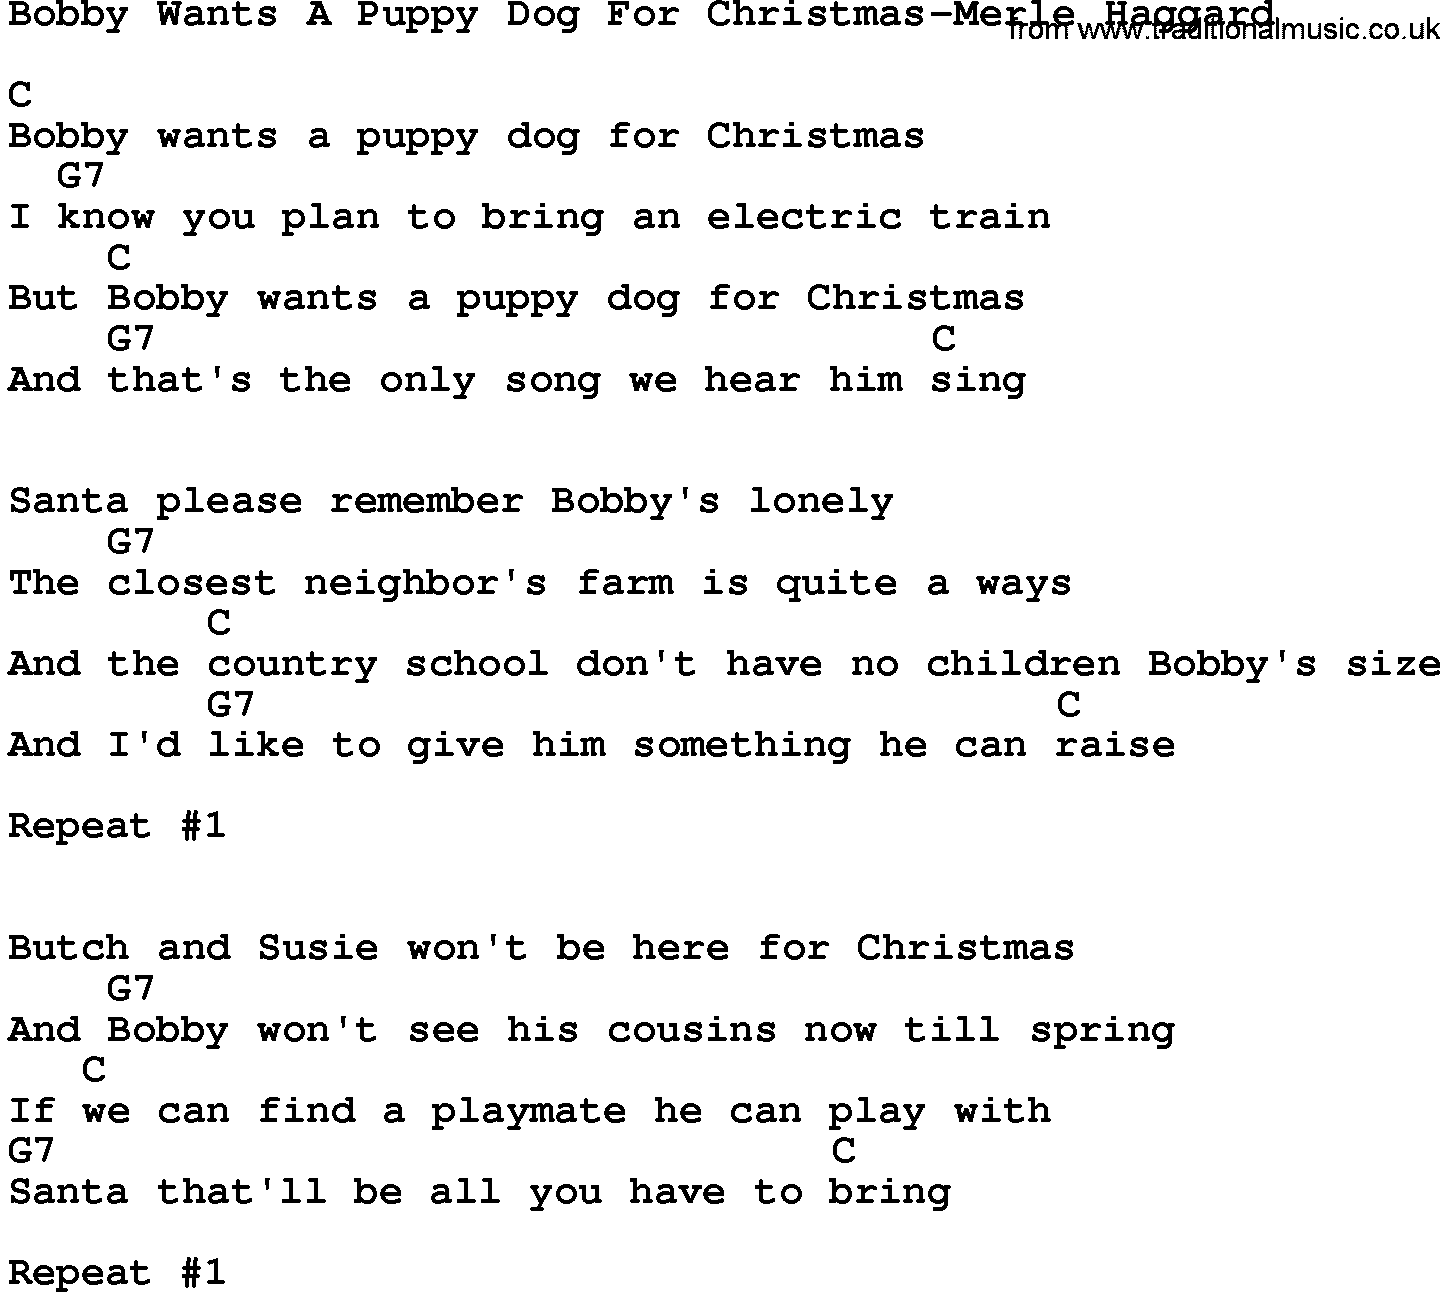 Country music song: Bobby Wants A Puppy Dog For Christmas-Merle Haggard lyrics and chords